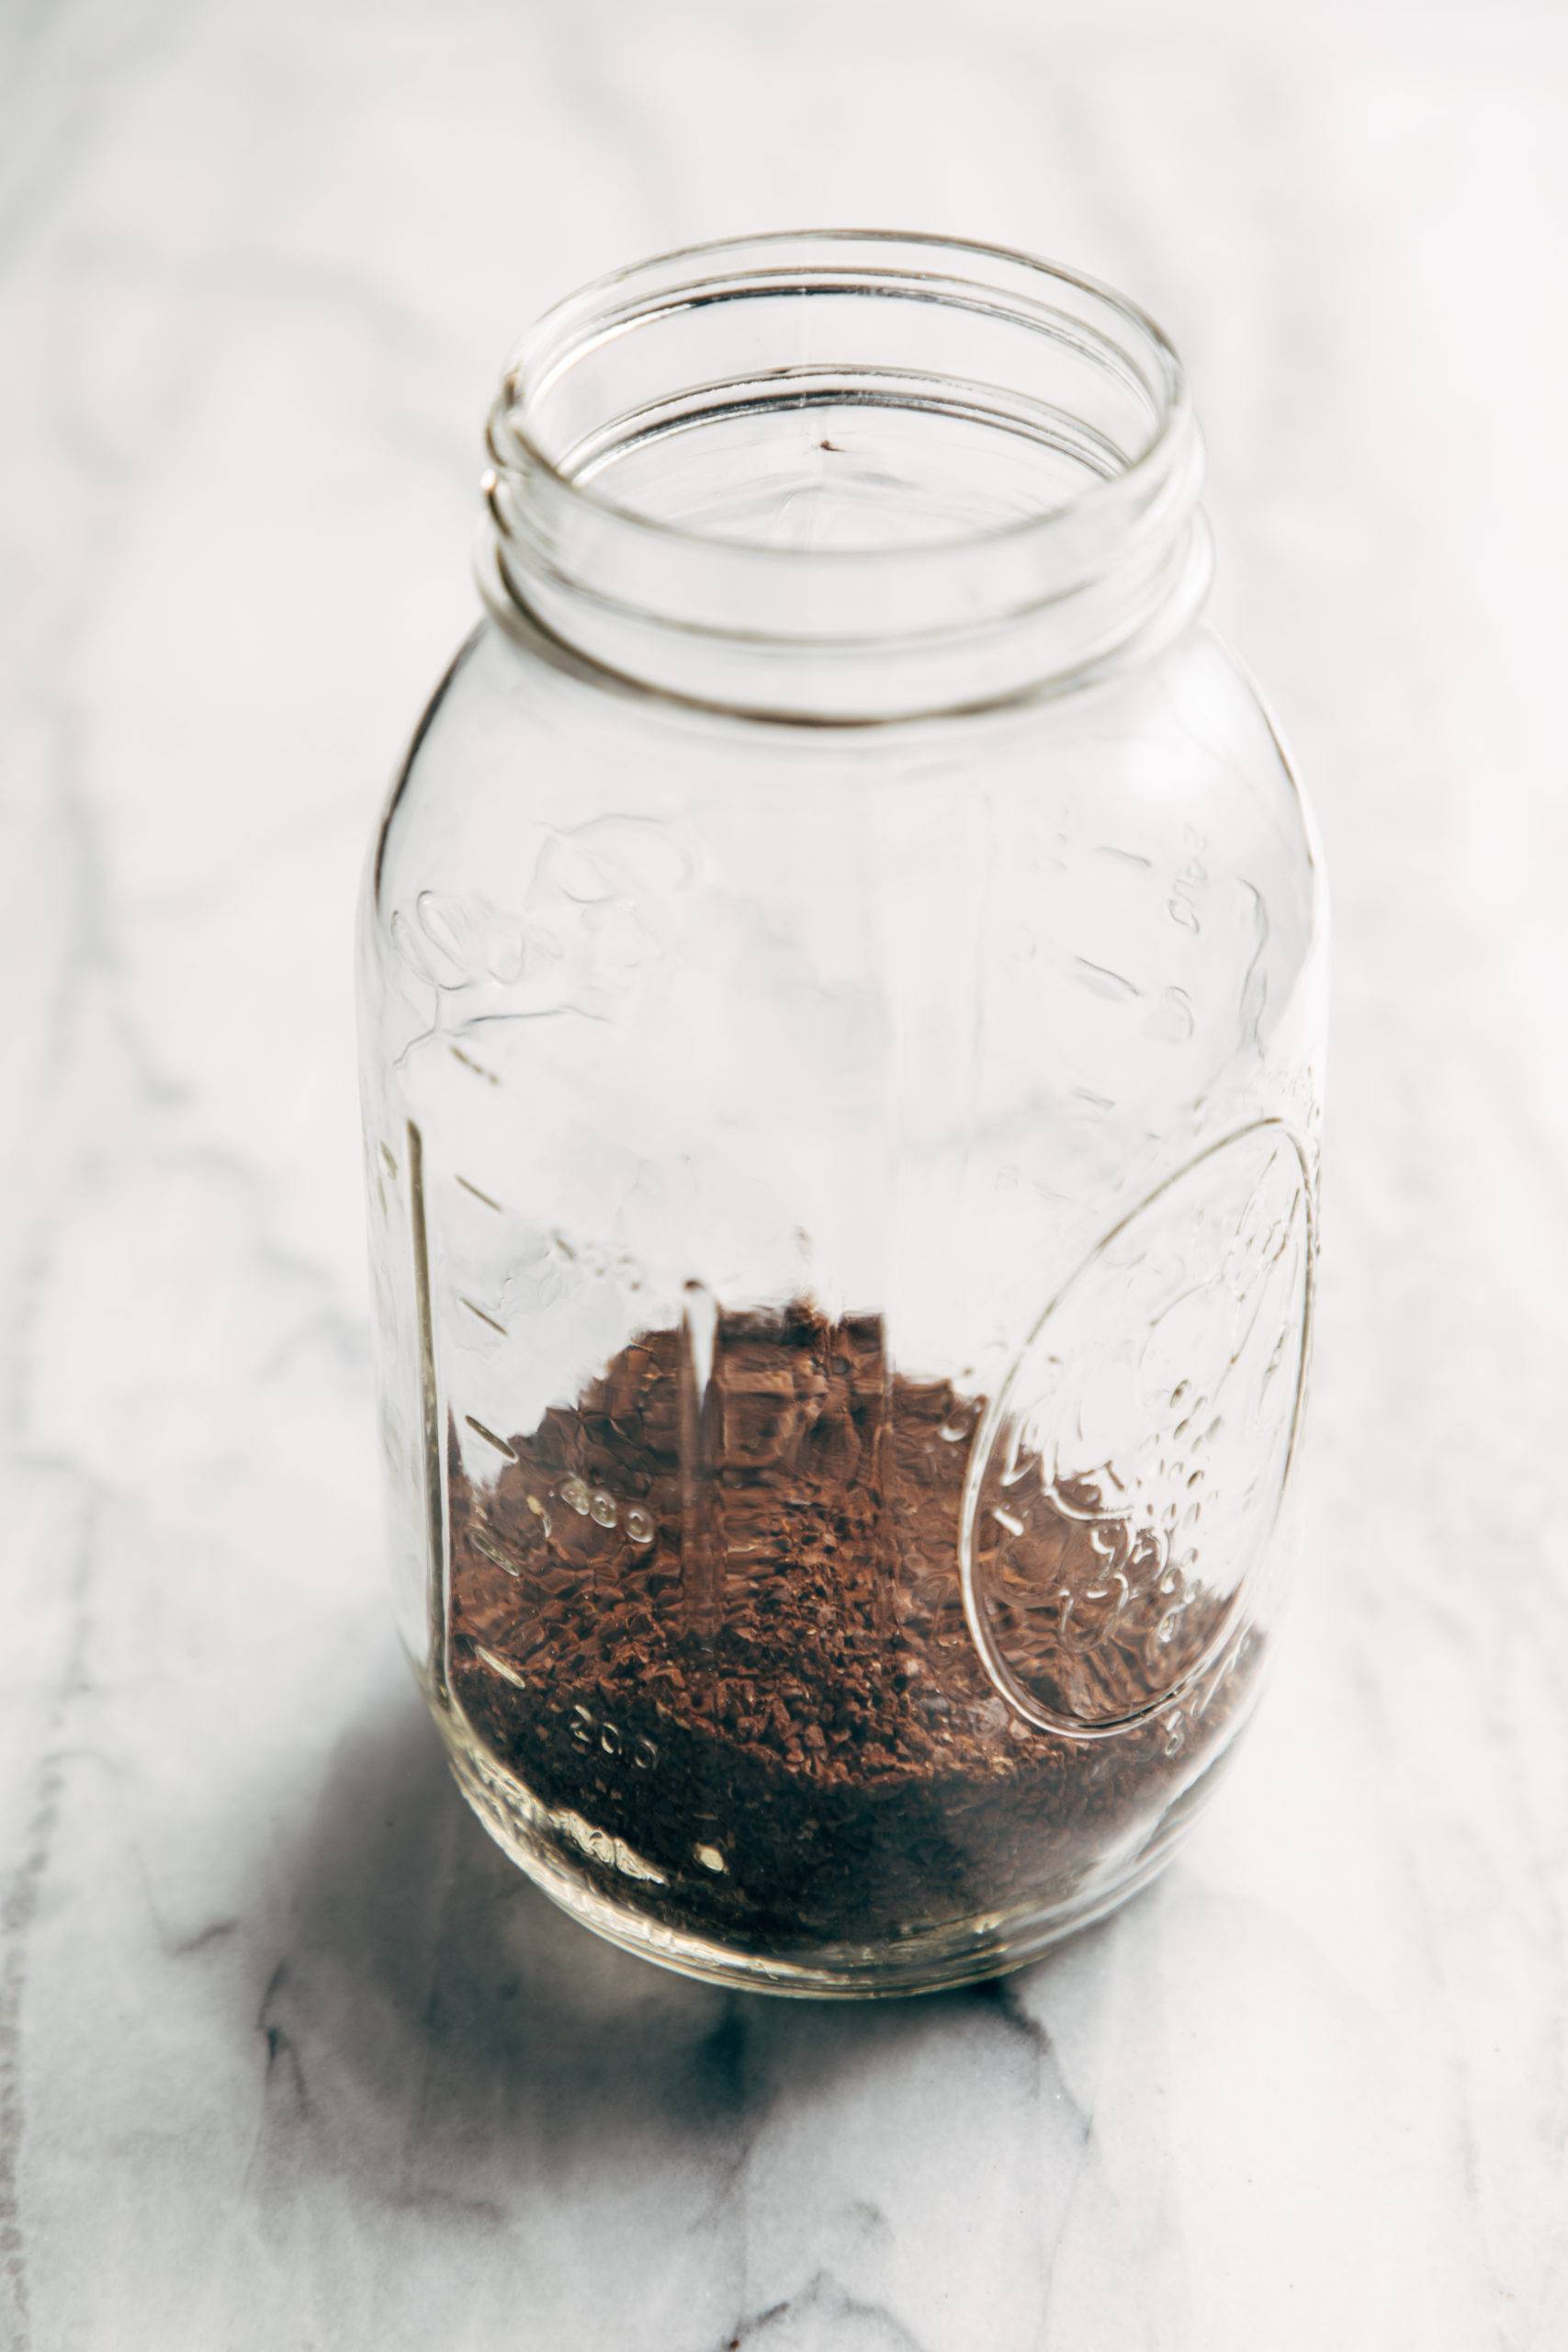 Coffee grounds in a jar for cold brew coffee